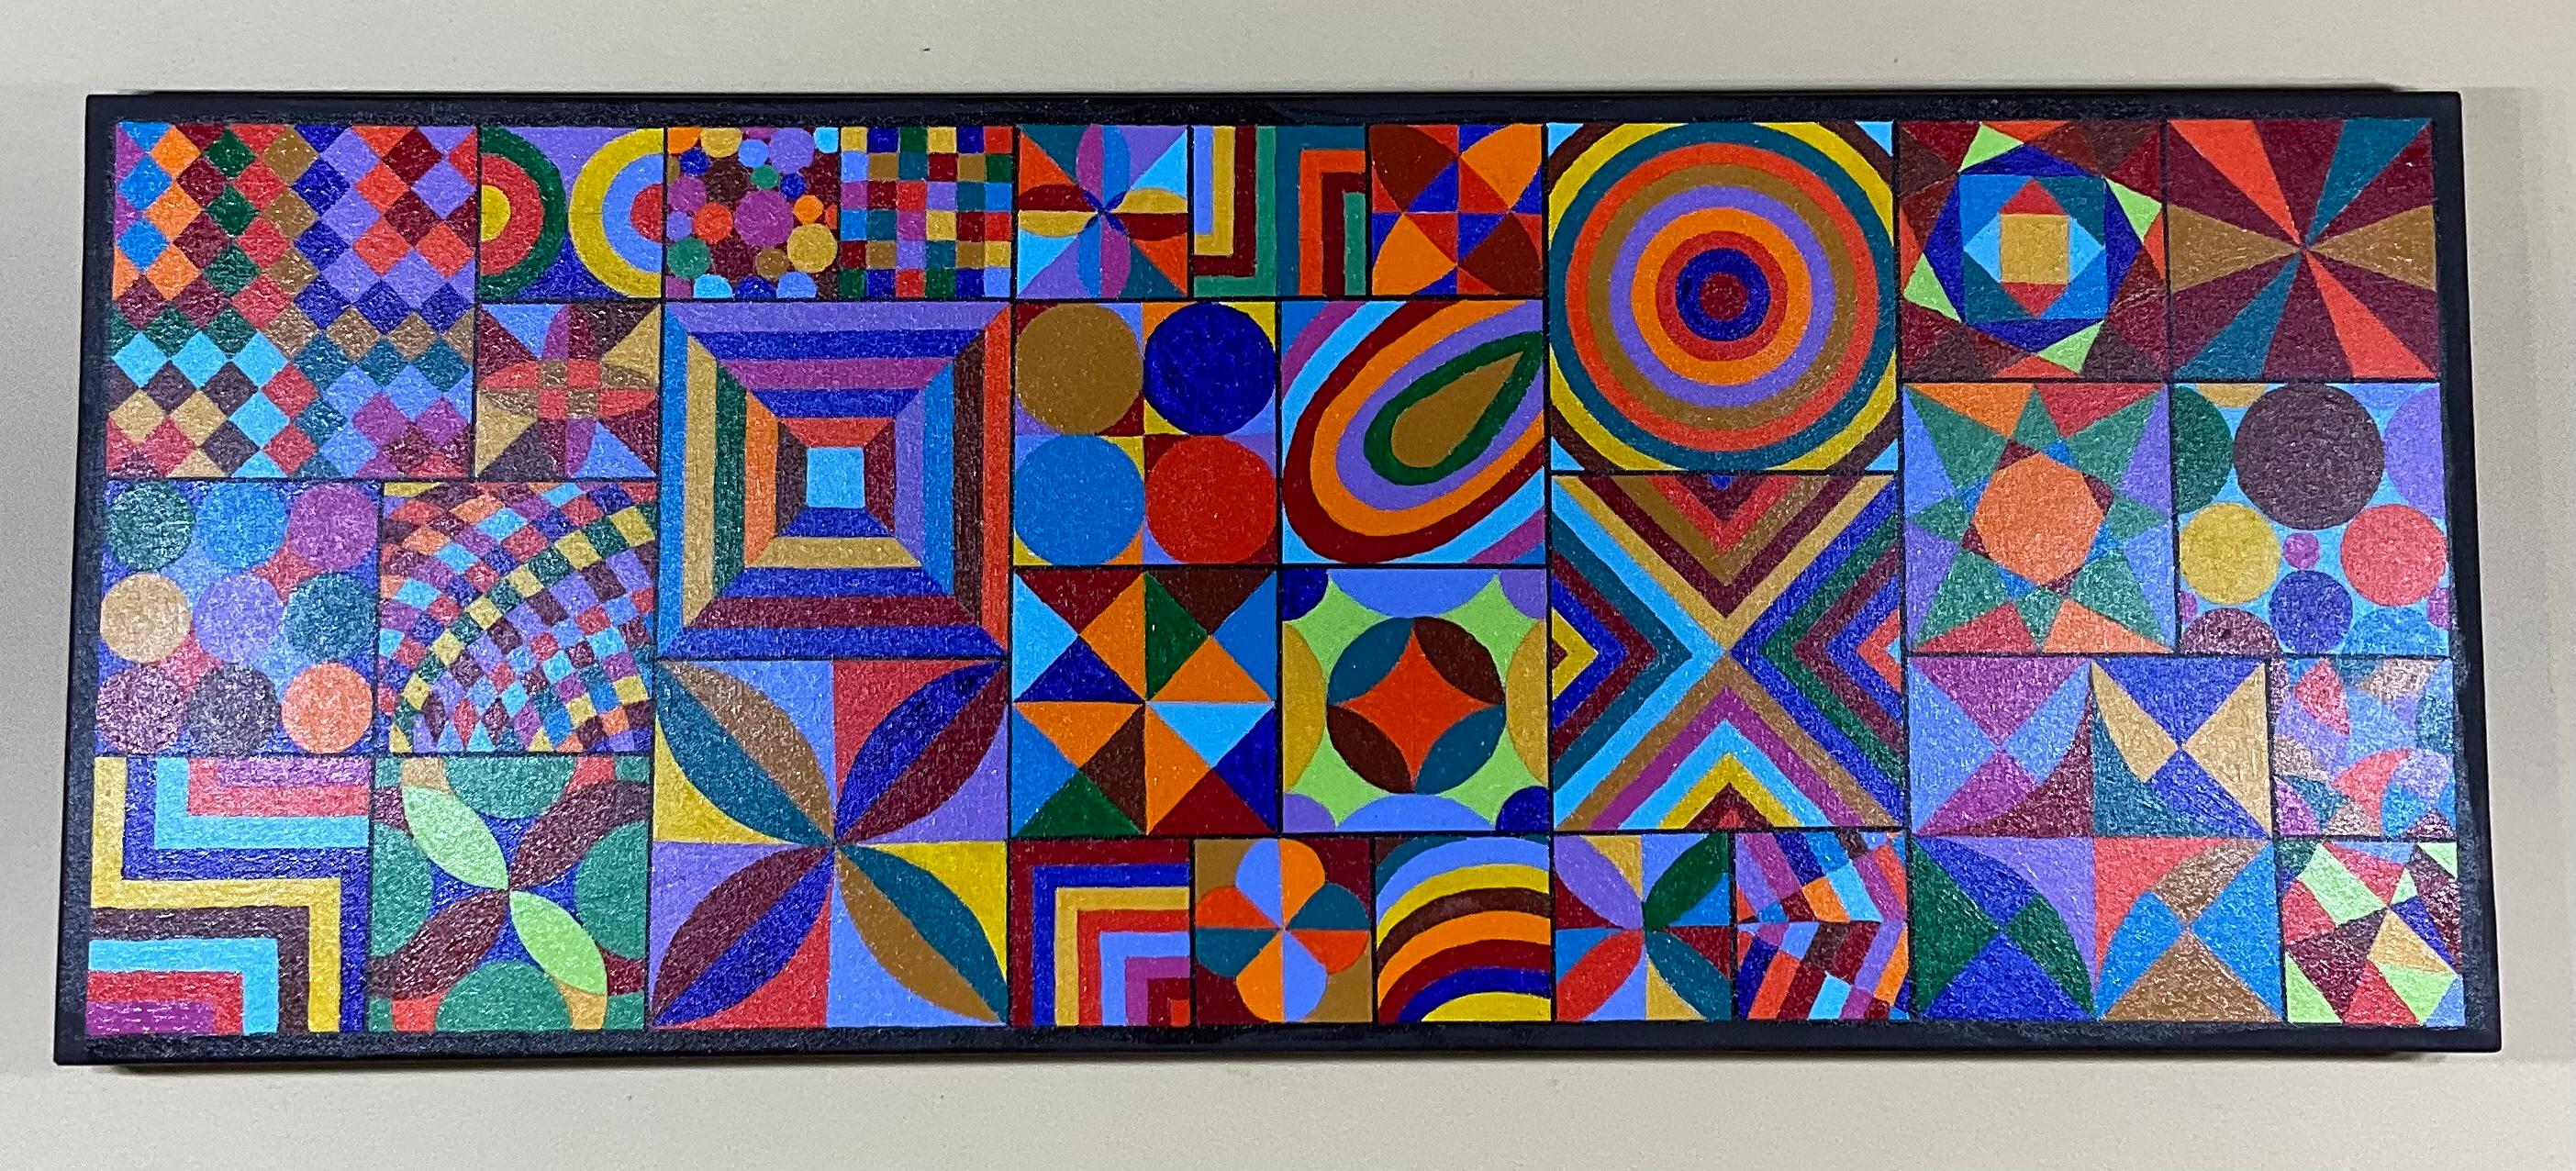 Contemporary Geometric Style by Artist Stanley Brundage